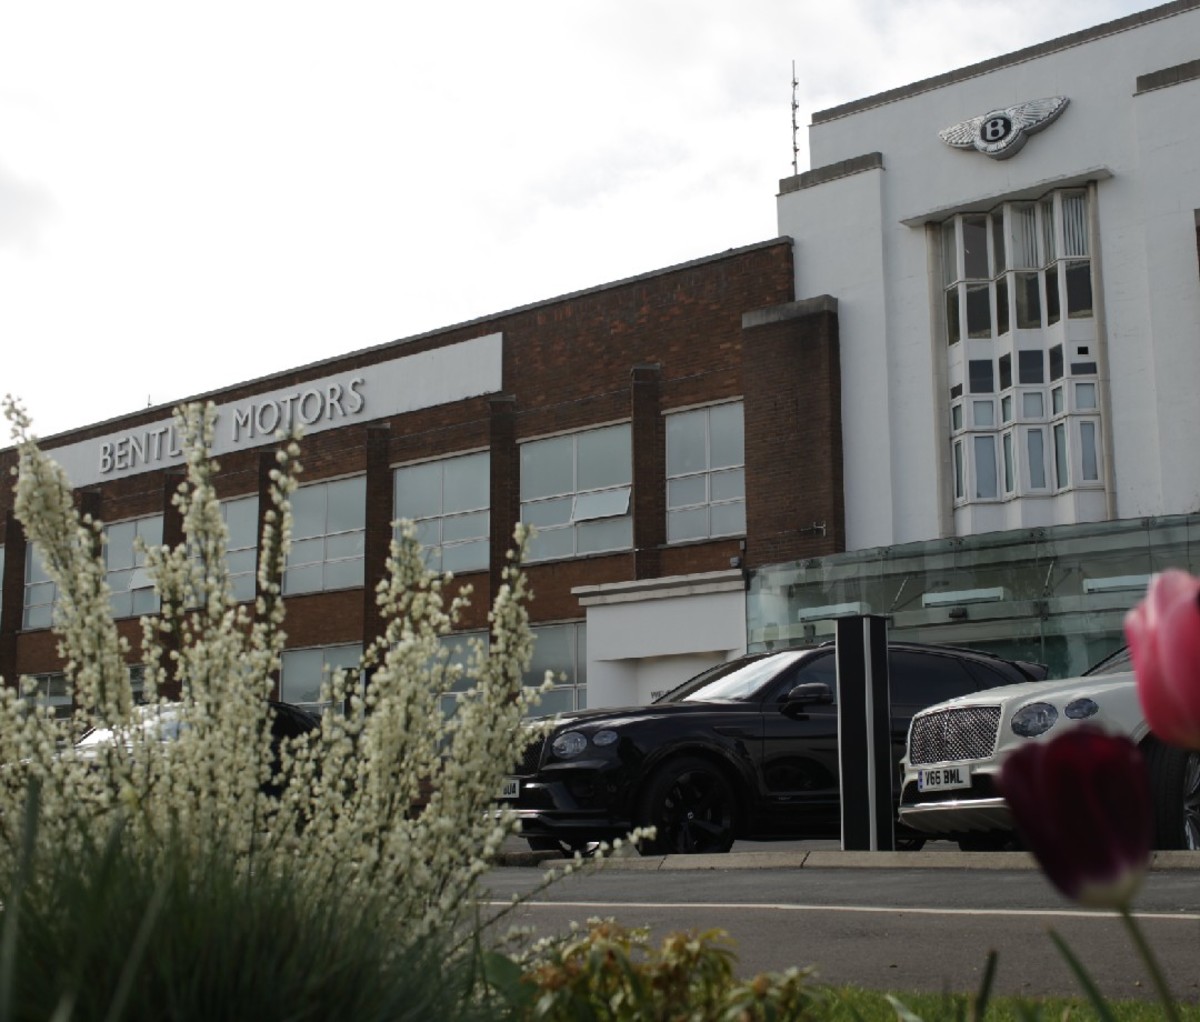 Exterior of the Bentley facility in Crewe, England